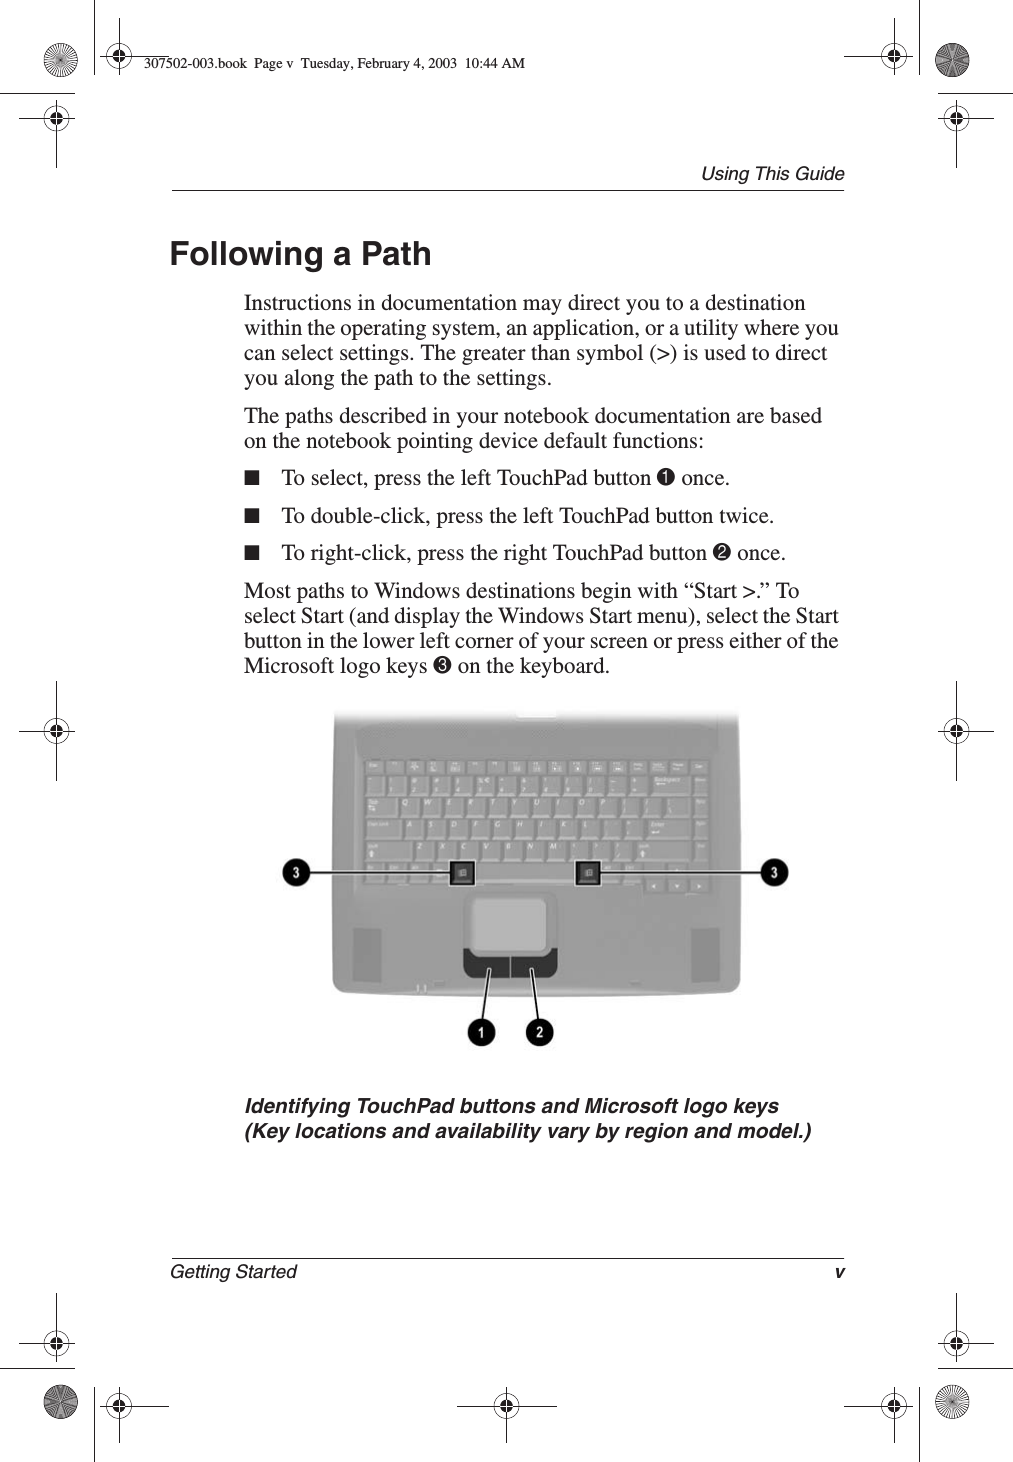 Using This GuideGetting Started vFollowing a PathInstructions in documentation may direct you to a destination within the operating system, an application, or a utility where you can select settings. The greater than symbol (&gt;) is used to direct you along the path to the settings.The paths described in your notebook documentation are based on the notebook pointing device default functions:■To select, press the left TouchPad button 1 once.■To double-click, press the left TouchPad button twice.■To right-click, press the right TouchPad button 2 once.Most paths to Windows destinations begin with “Start &gt;.” To select Start (and display the Windows Start menu), select the Start button in the lower left corner of your screen or press either of the Microsoft logo keys 3 on the keyboard.Identifying TouchPad buttons and Microsoft logo keys(Key locations and availability vary by region and model.)307502-003.book  Page v  Tuesday, February 4, 2003  10:44 AM